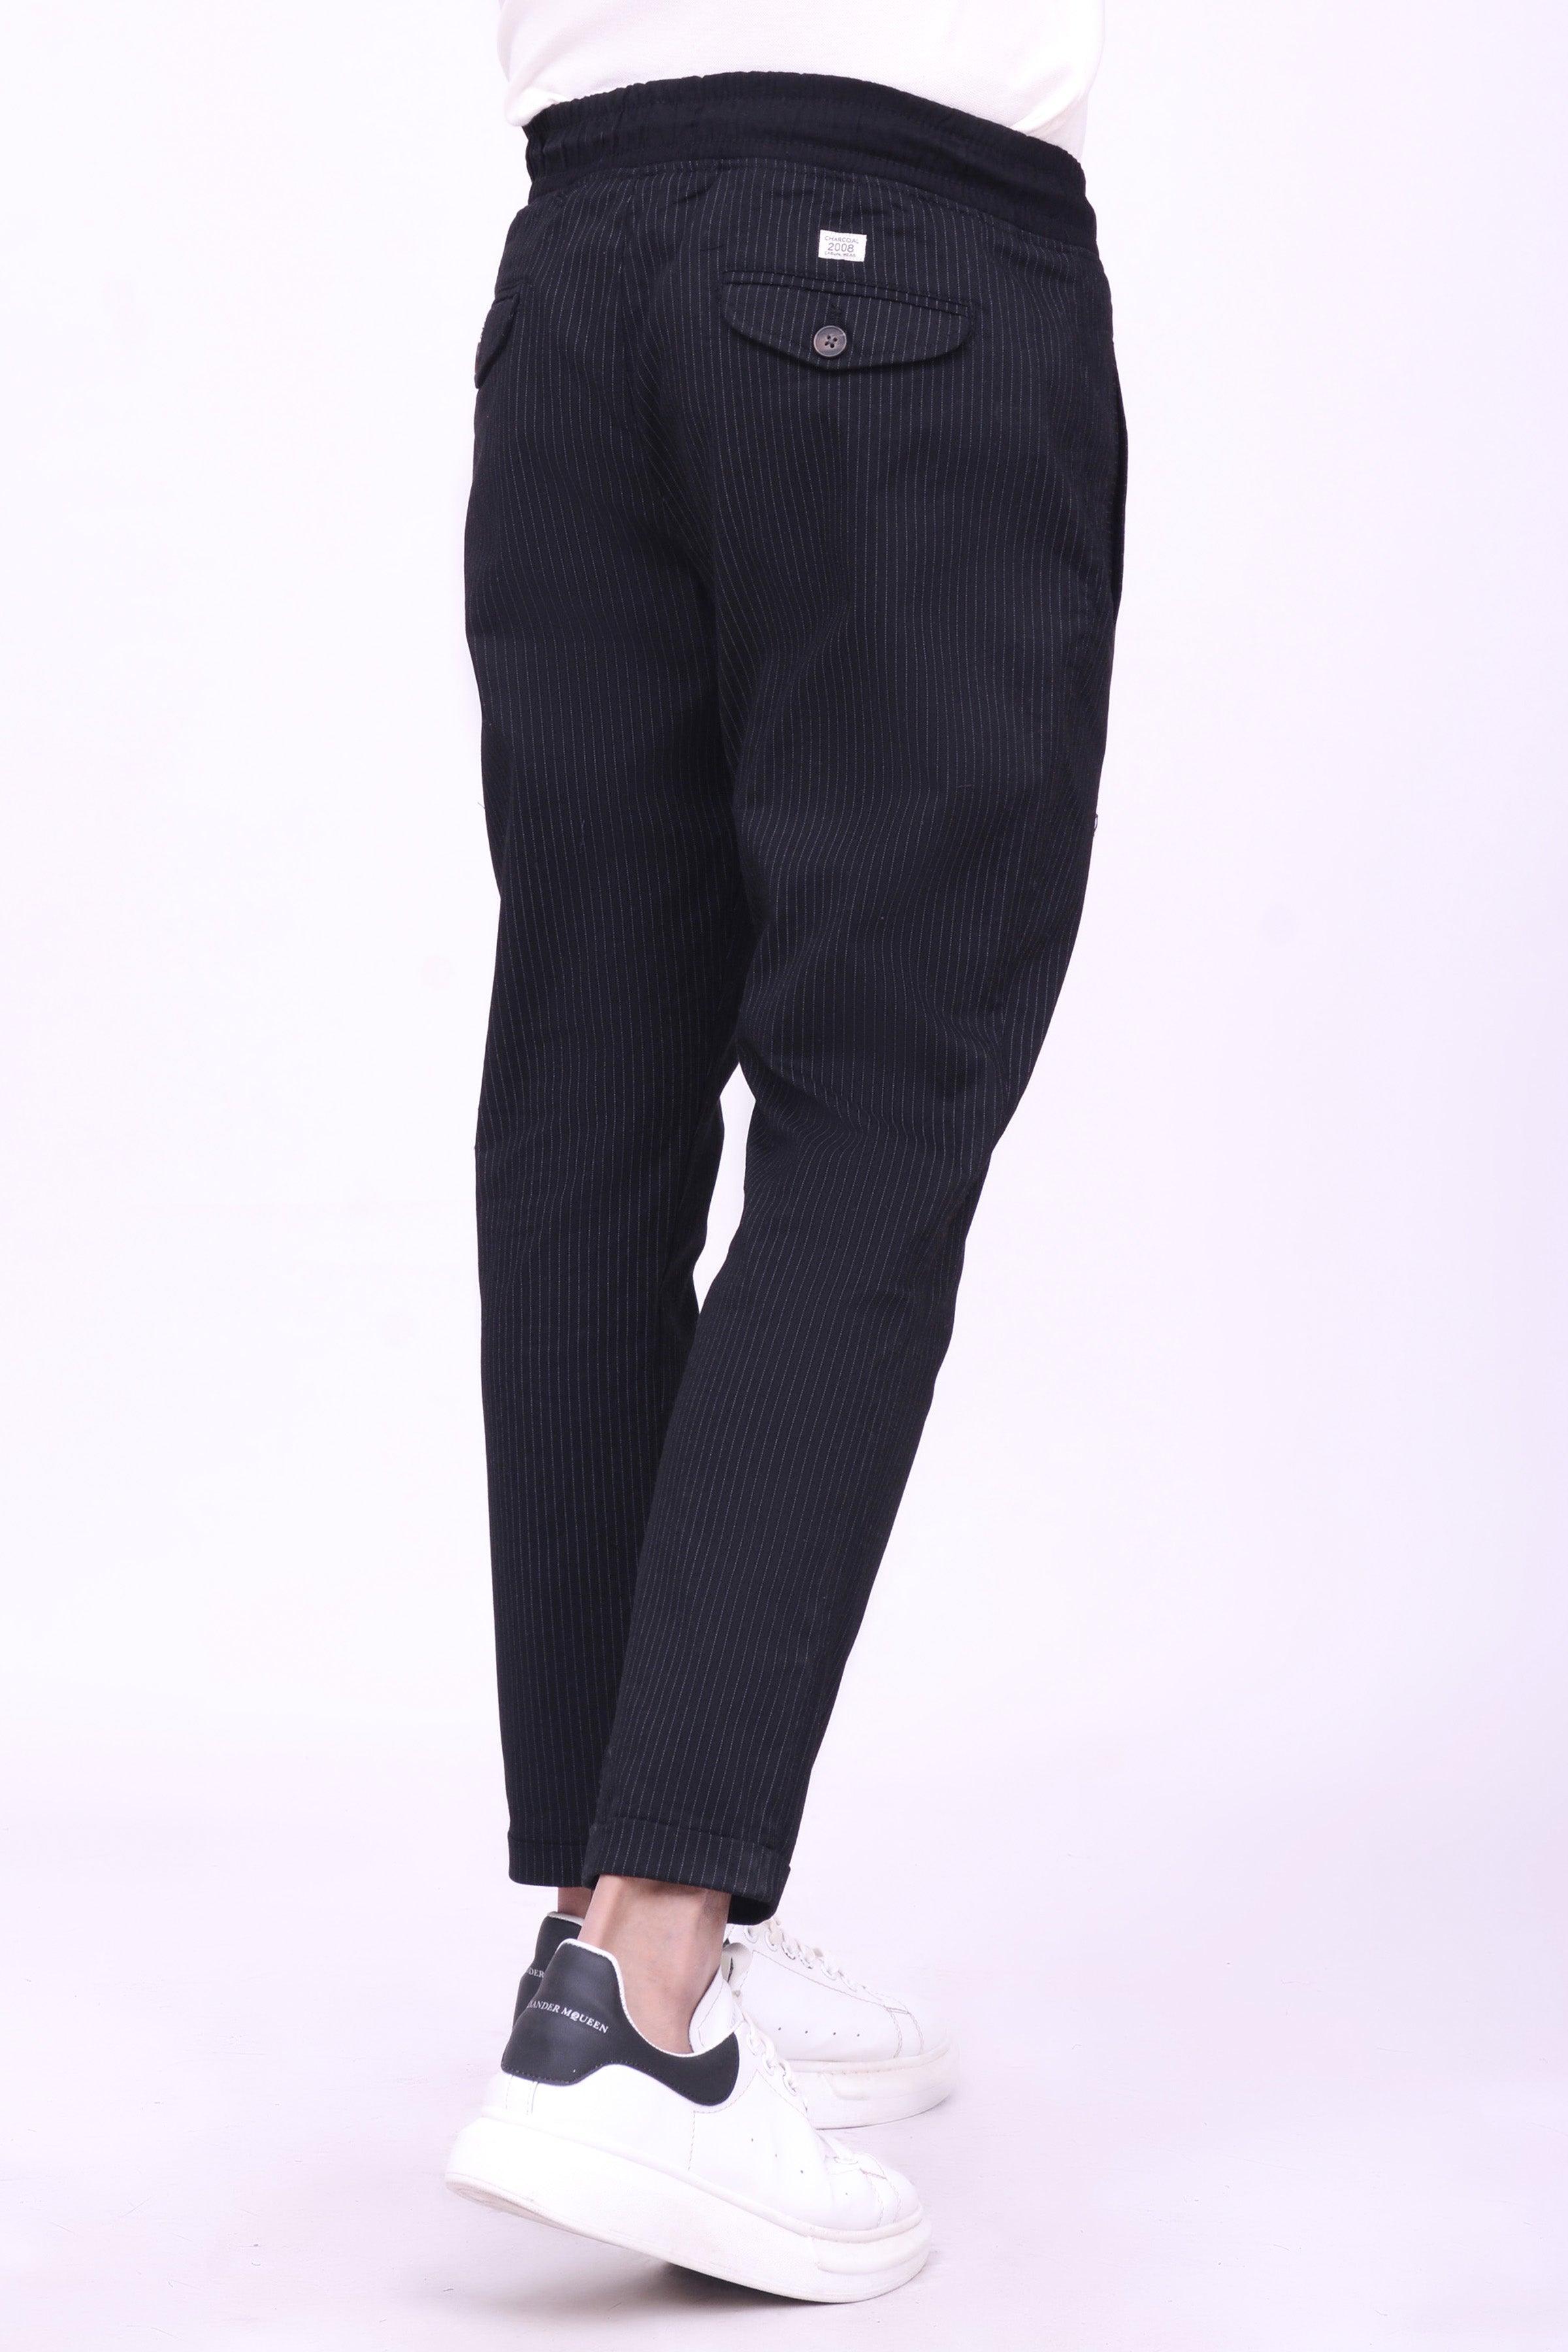 CASUAL JOGGER TROUSER BLACK at Charcoal Clothing